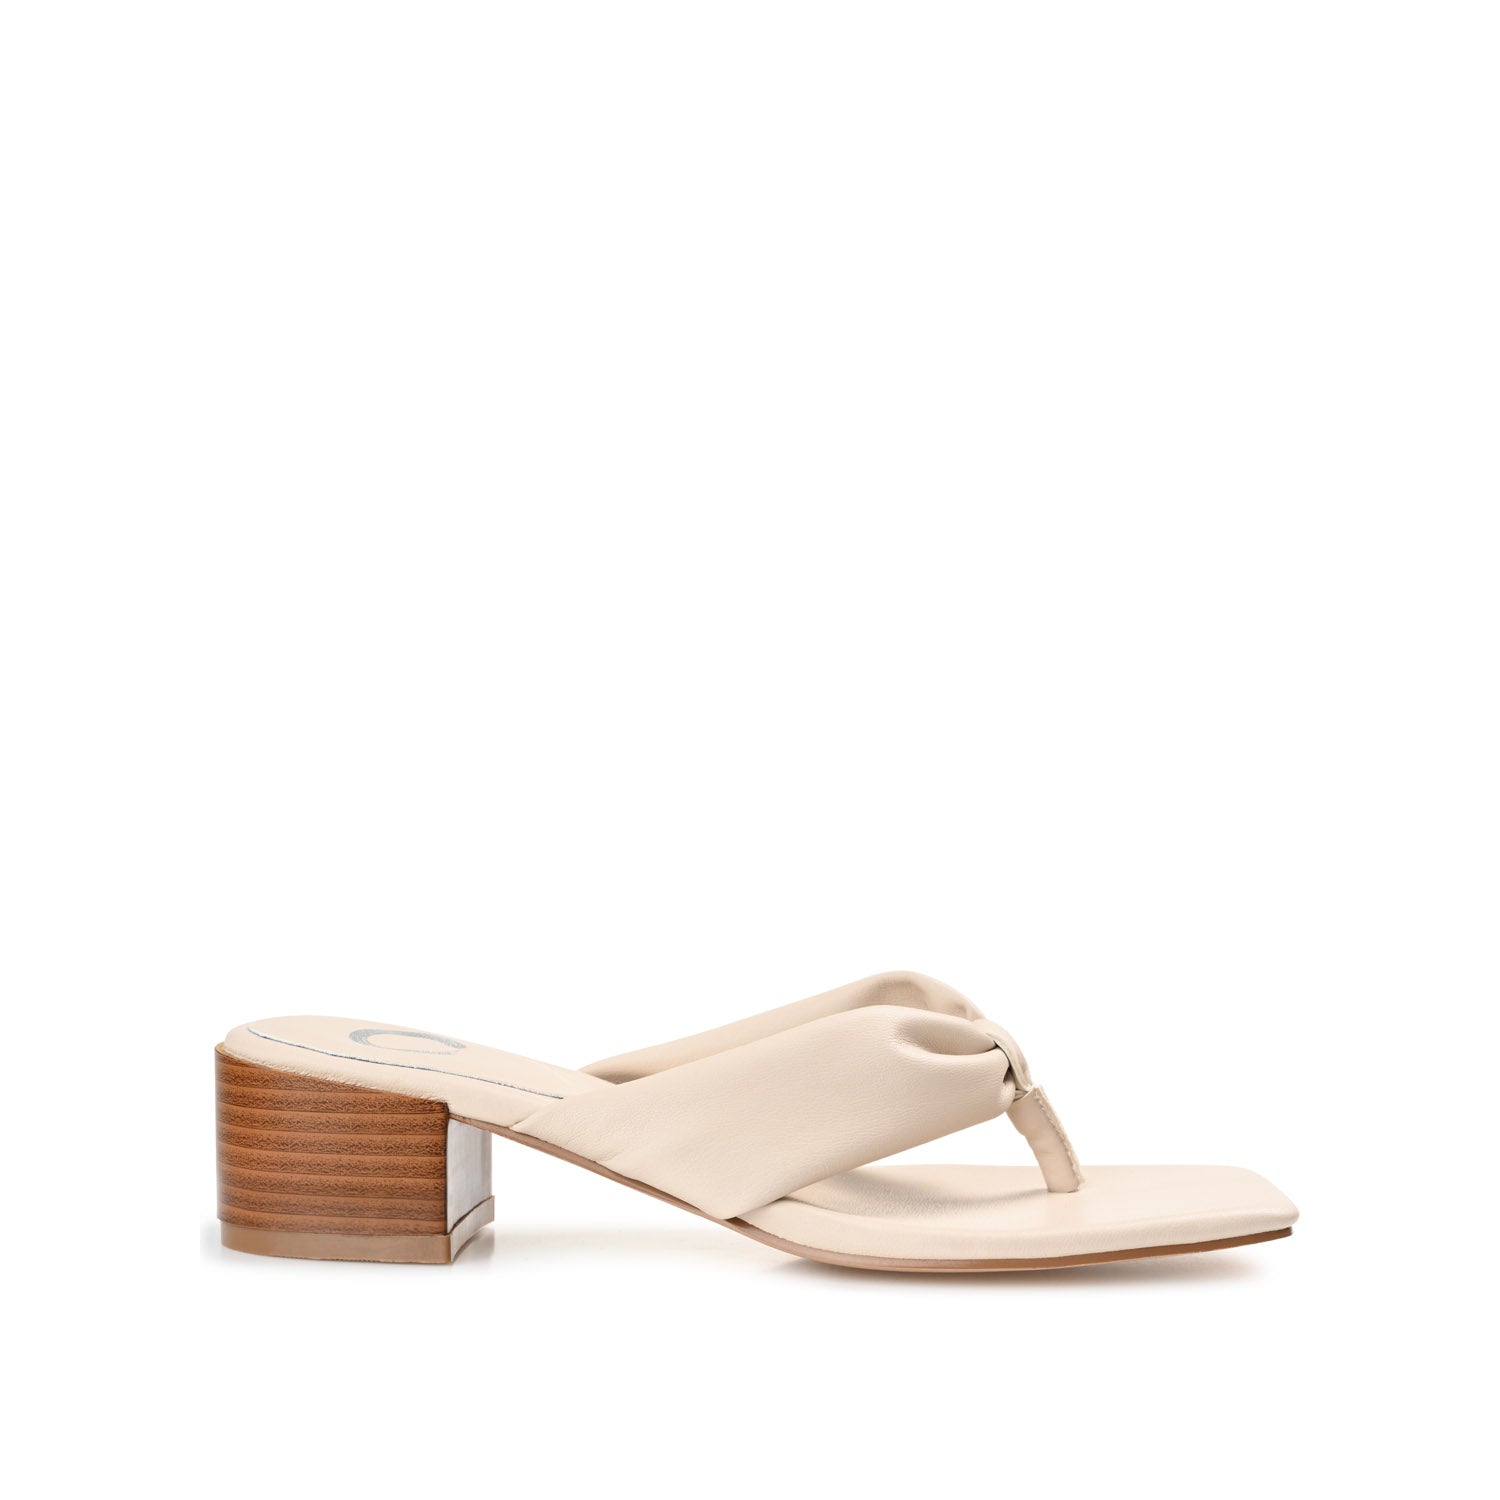 SEELAH BLOCK HEELED SANDALS IN FAUX LEATHER